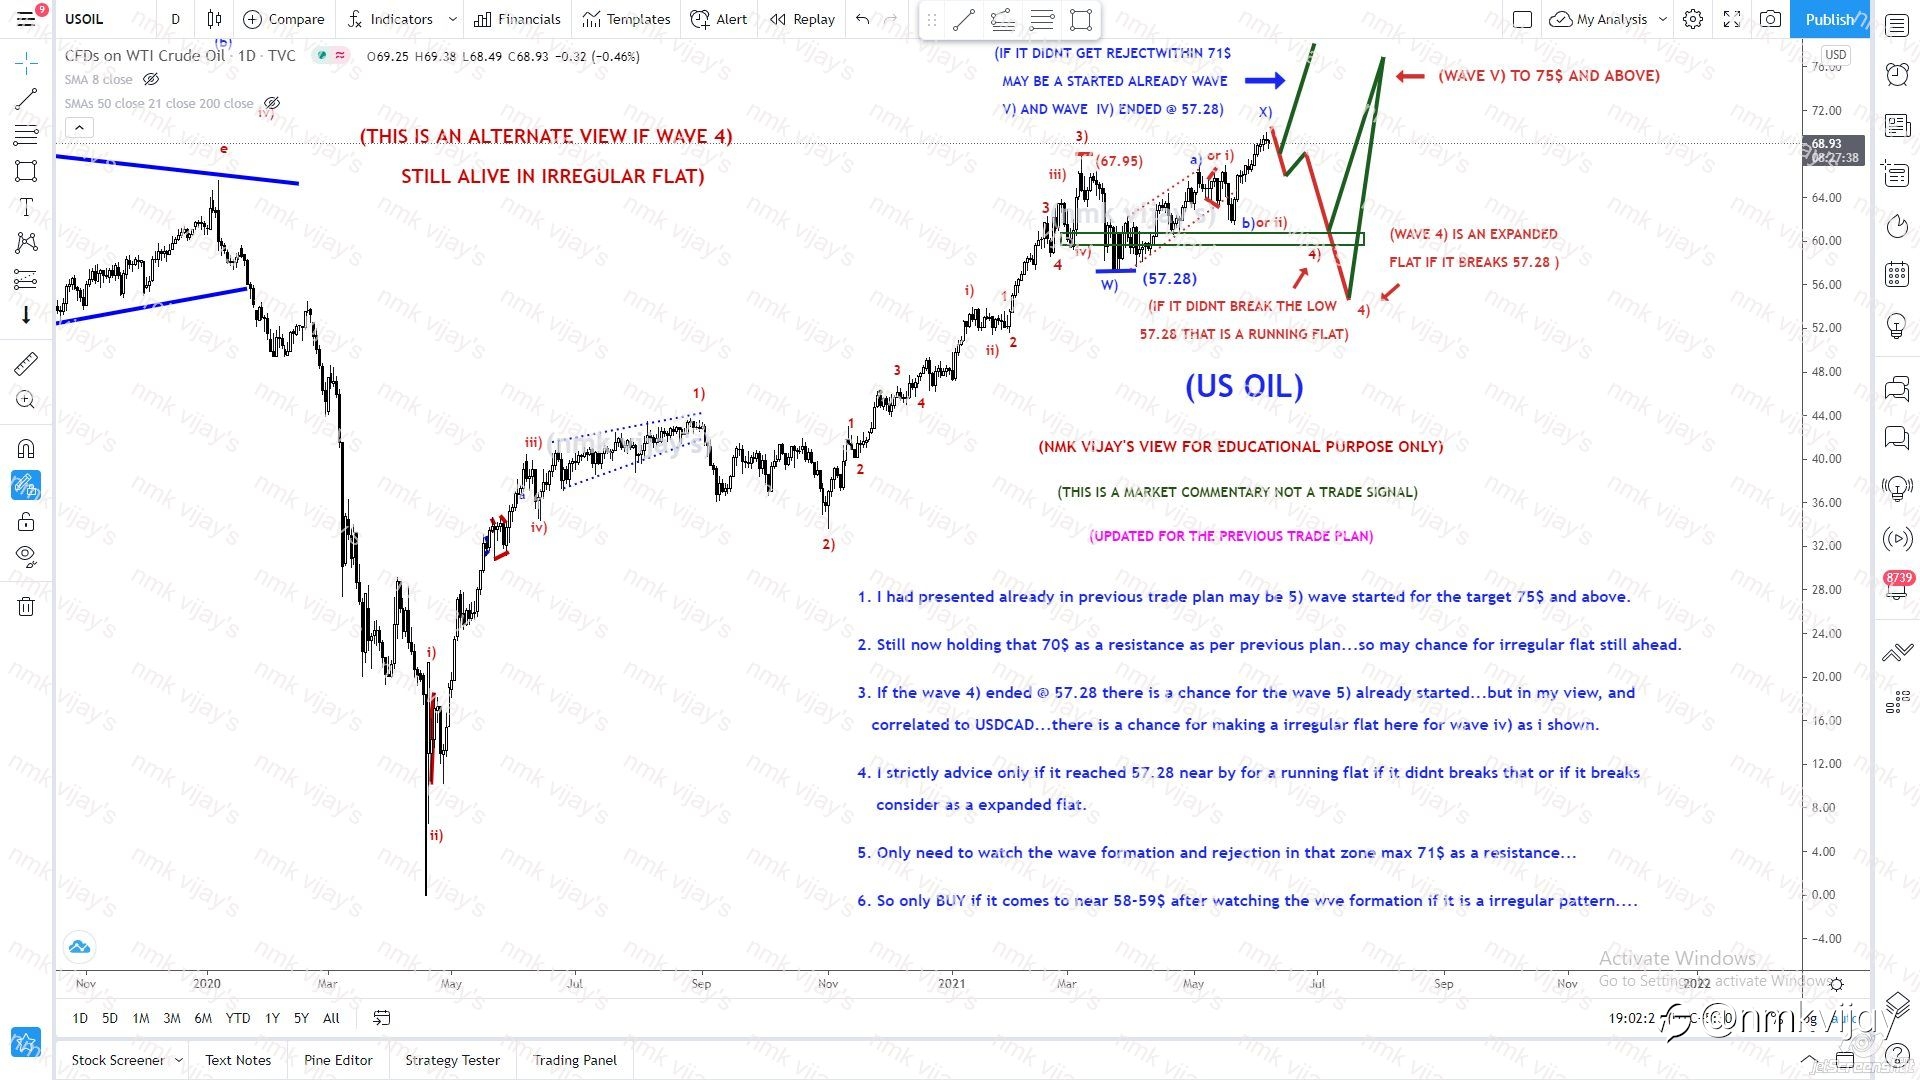 USOIL Still chances for making a irregular flat in wave 4) to 59 $ and below for running or 57.28 below as expanded flat.